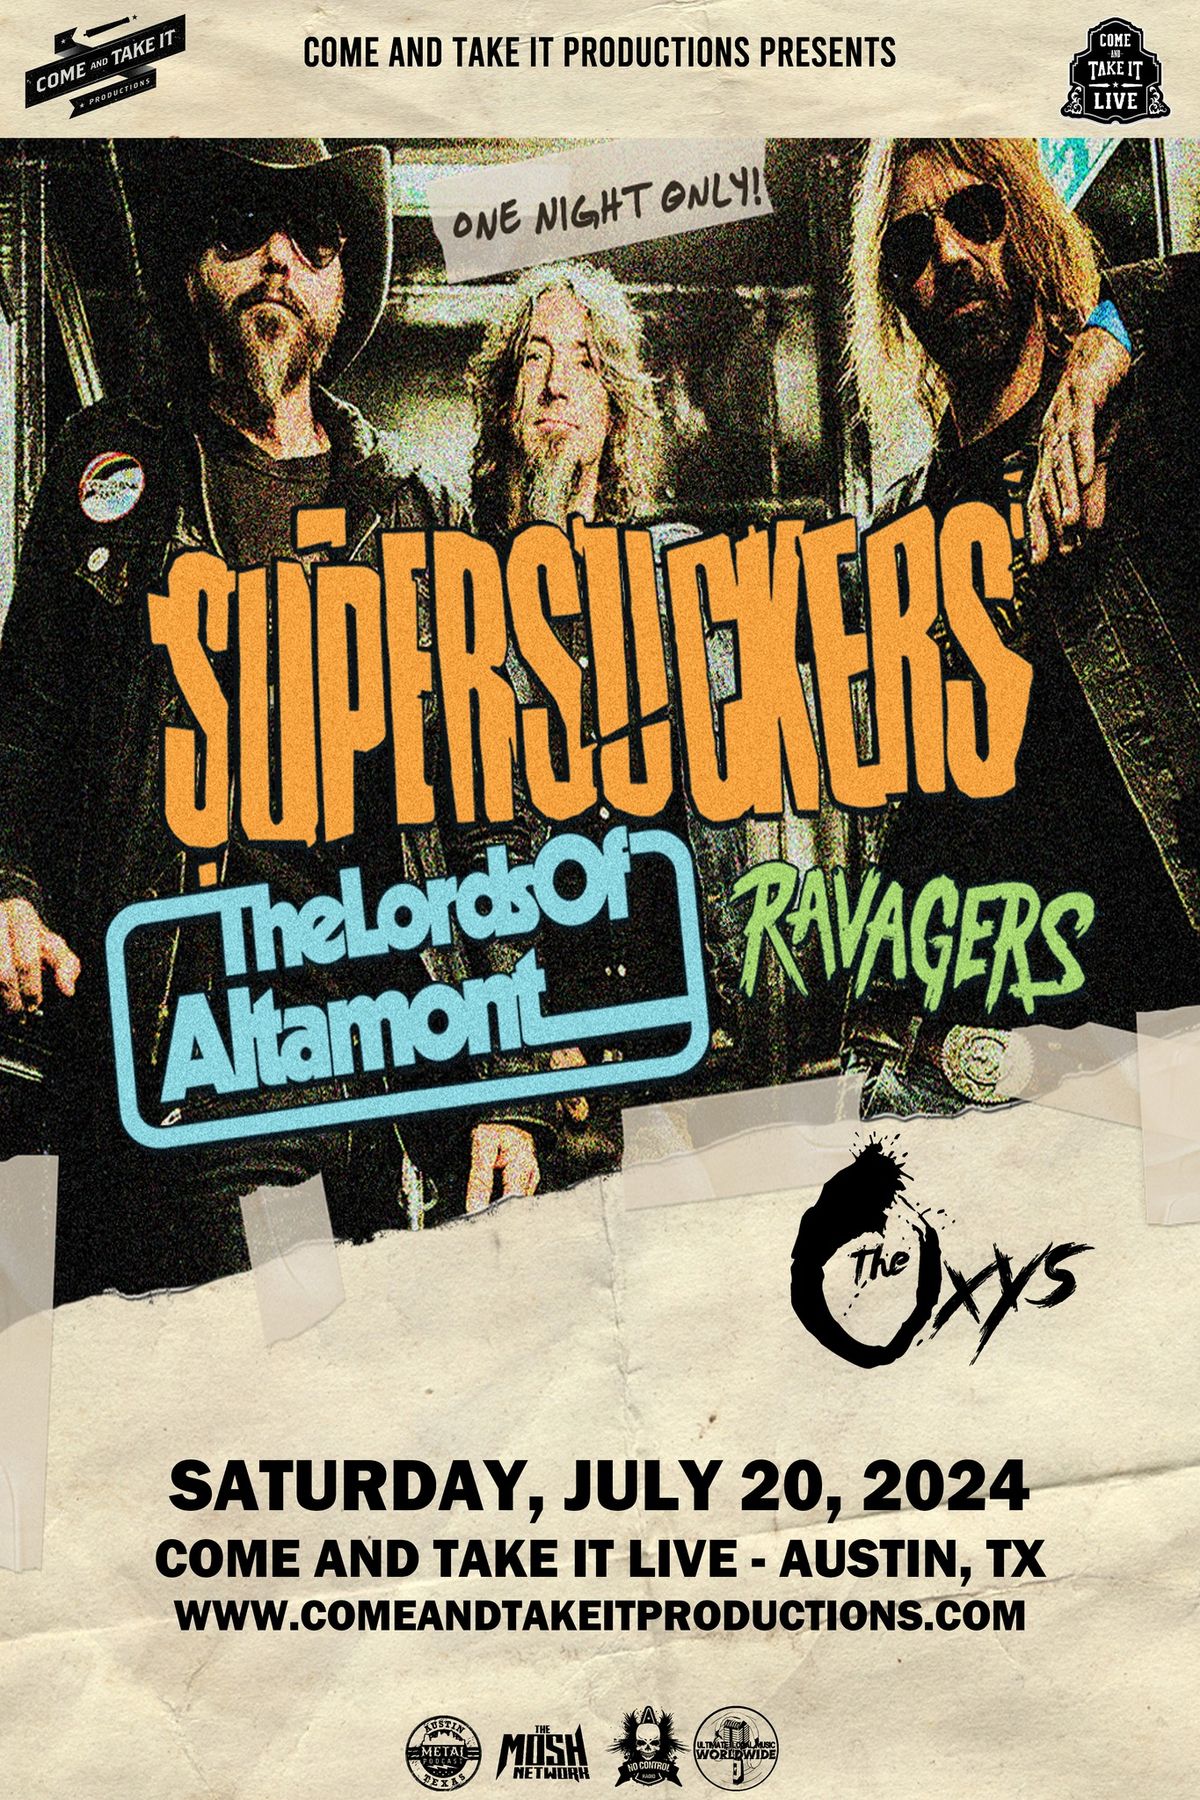 Supersuckers, The Lords of Altamont, Ravagers and The Oxys at Come and Take It Live!